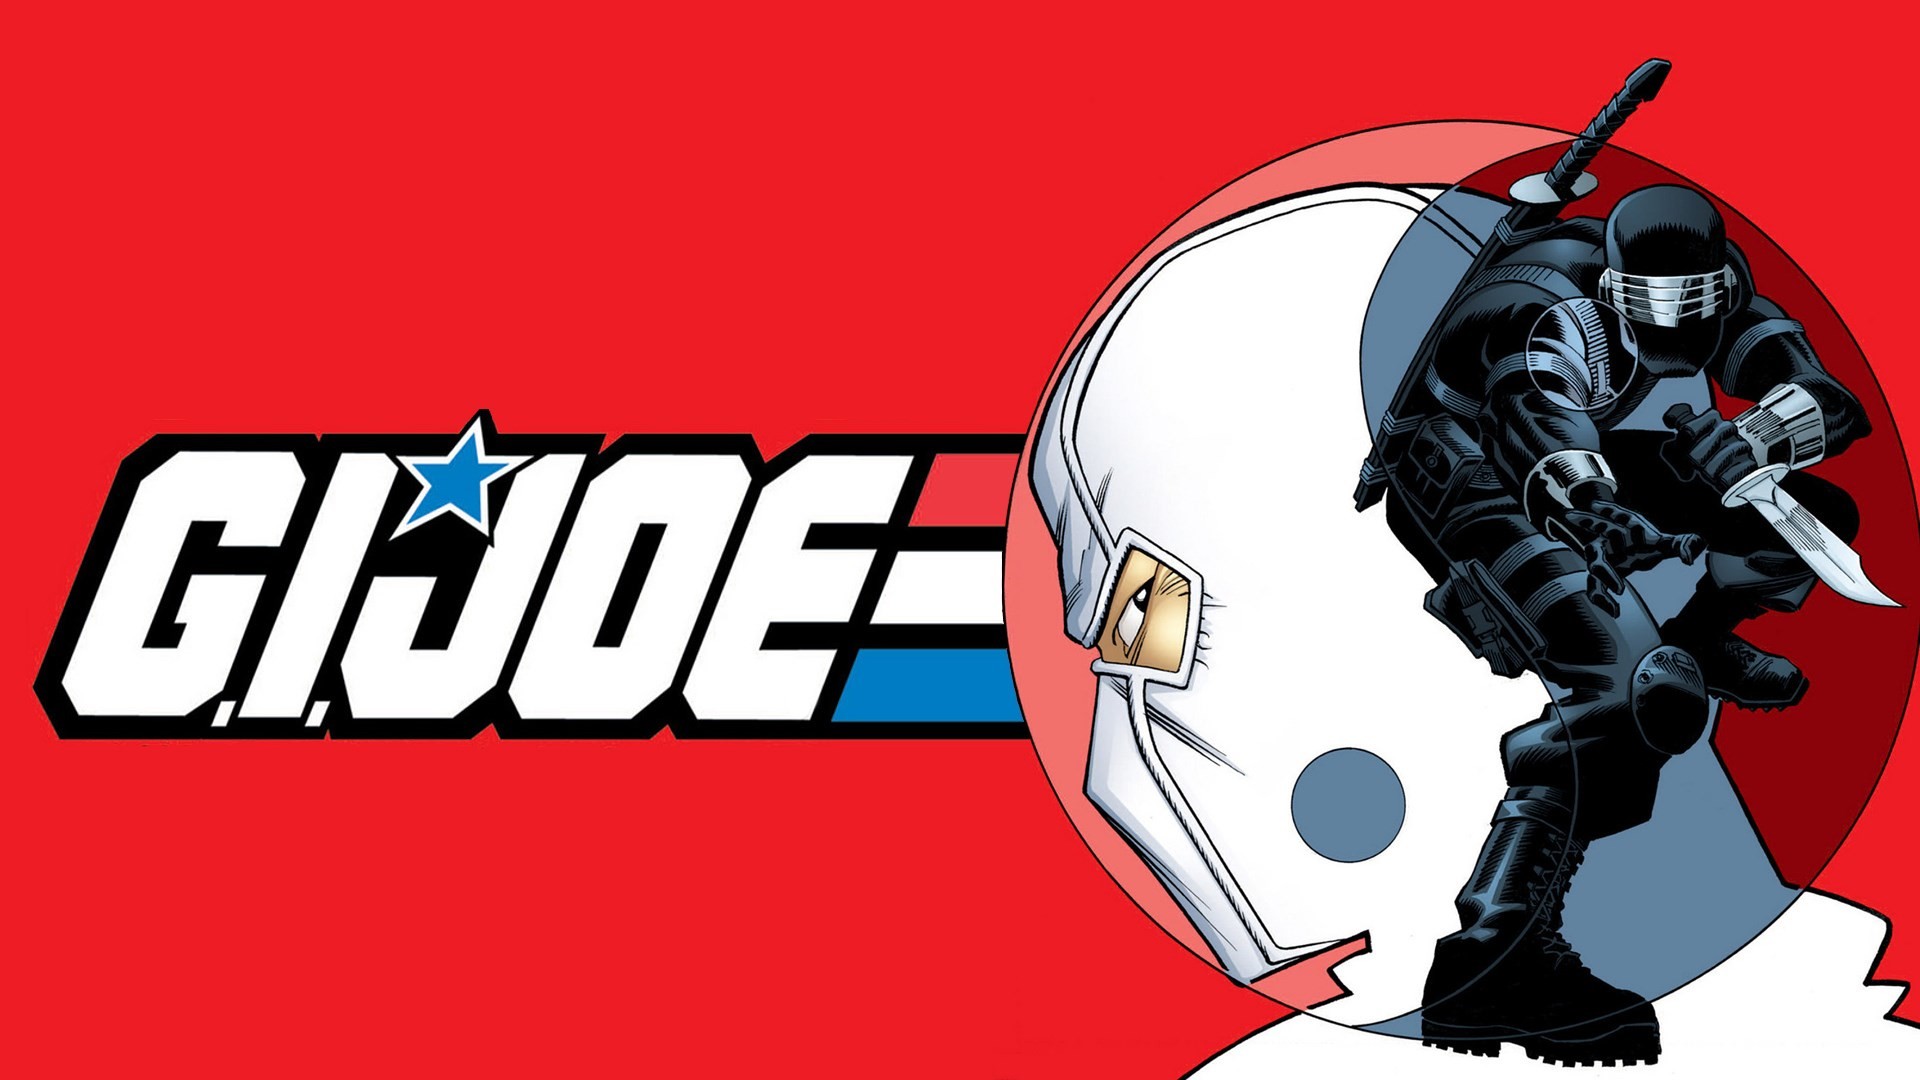 Today S Wallpaper Features The G - Gi Joe A Real American Hero - HD Wallpaper 